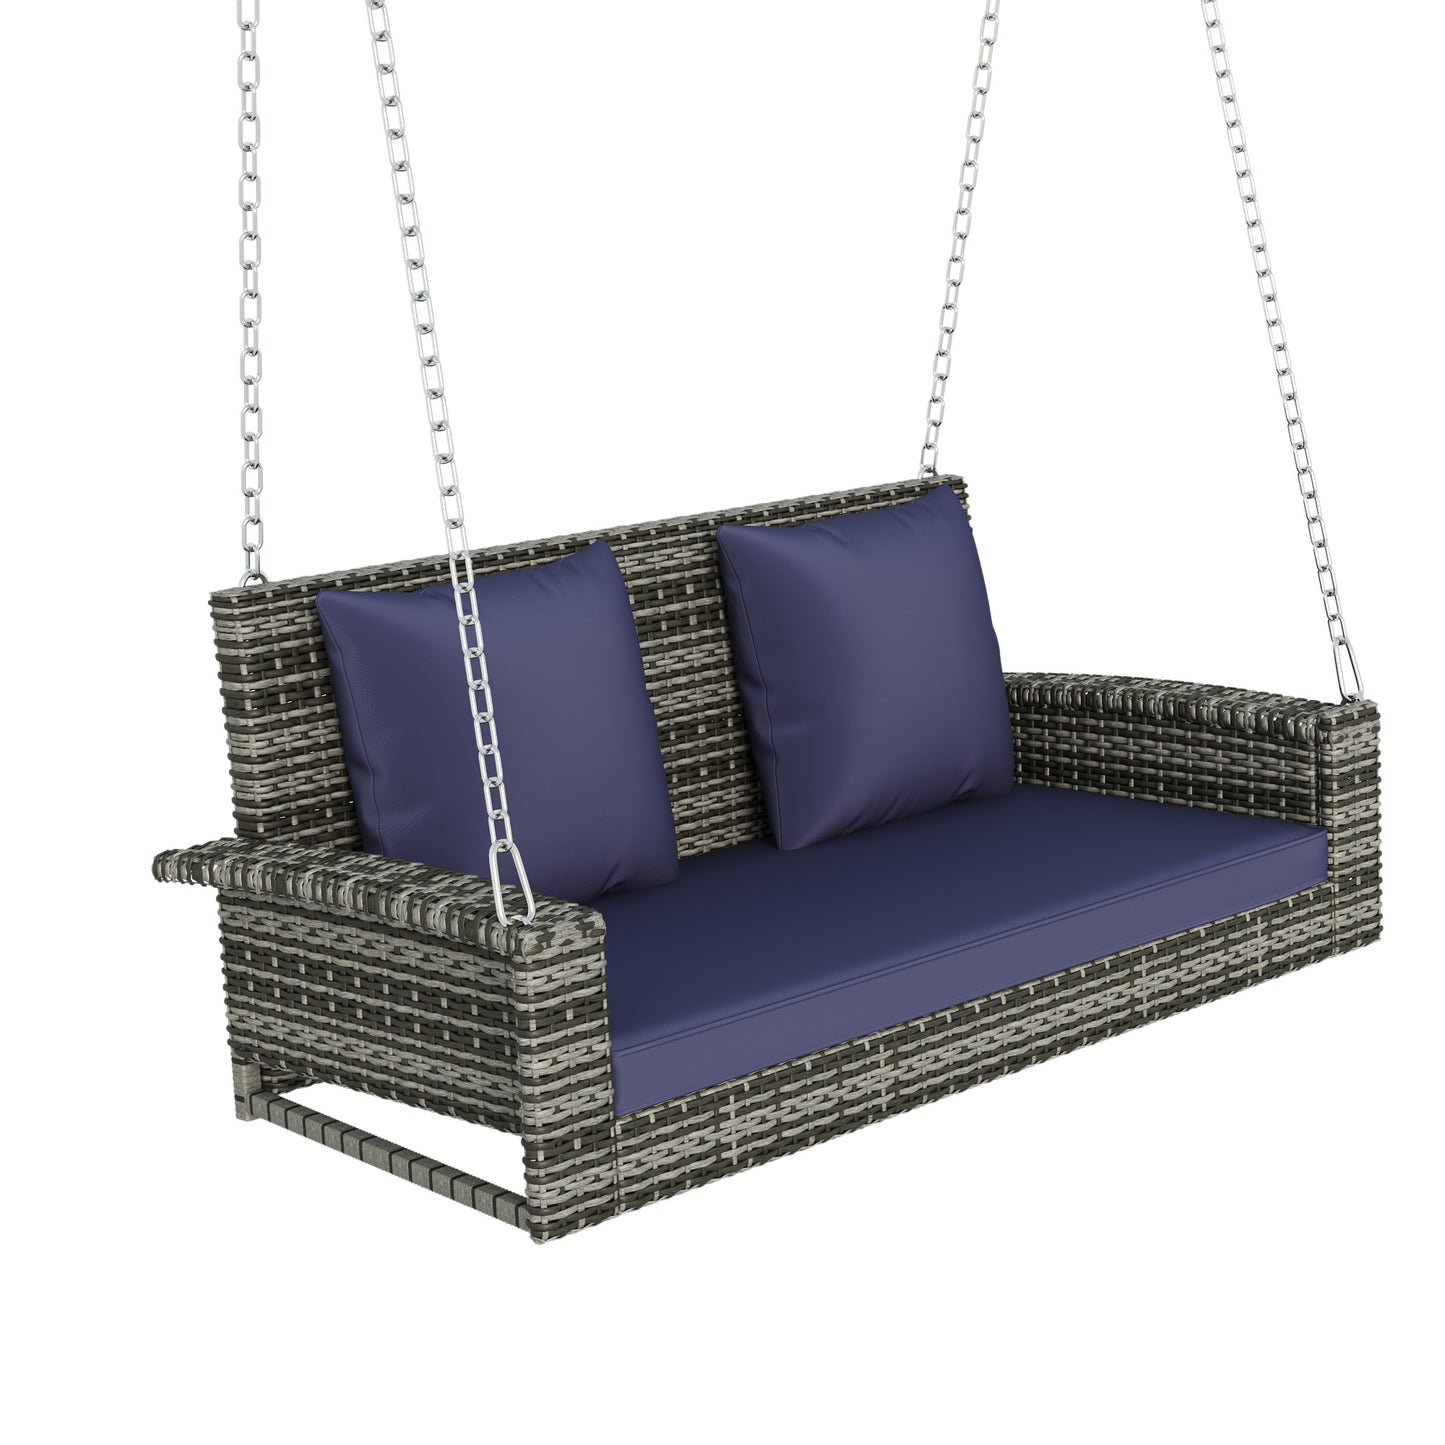 GO 2-Person Wicker Hanging Porch Swing with Chains, Cushion, Pillow, Rattan Swing Bench for Garden, Backyard, Pond. (Gray Wicker, Blue Cushion)